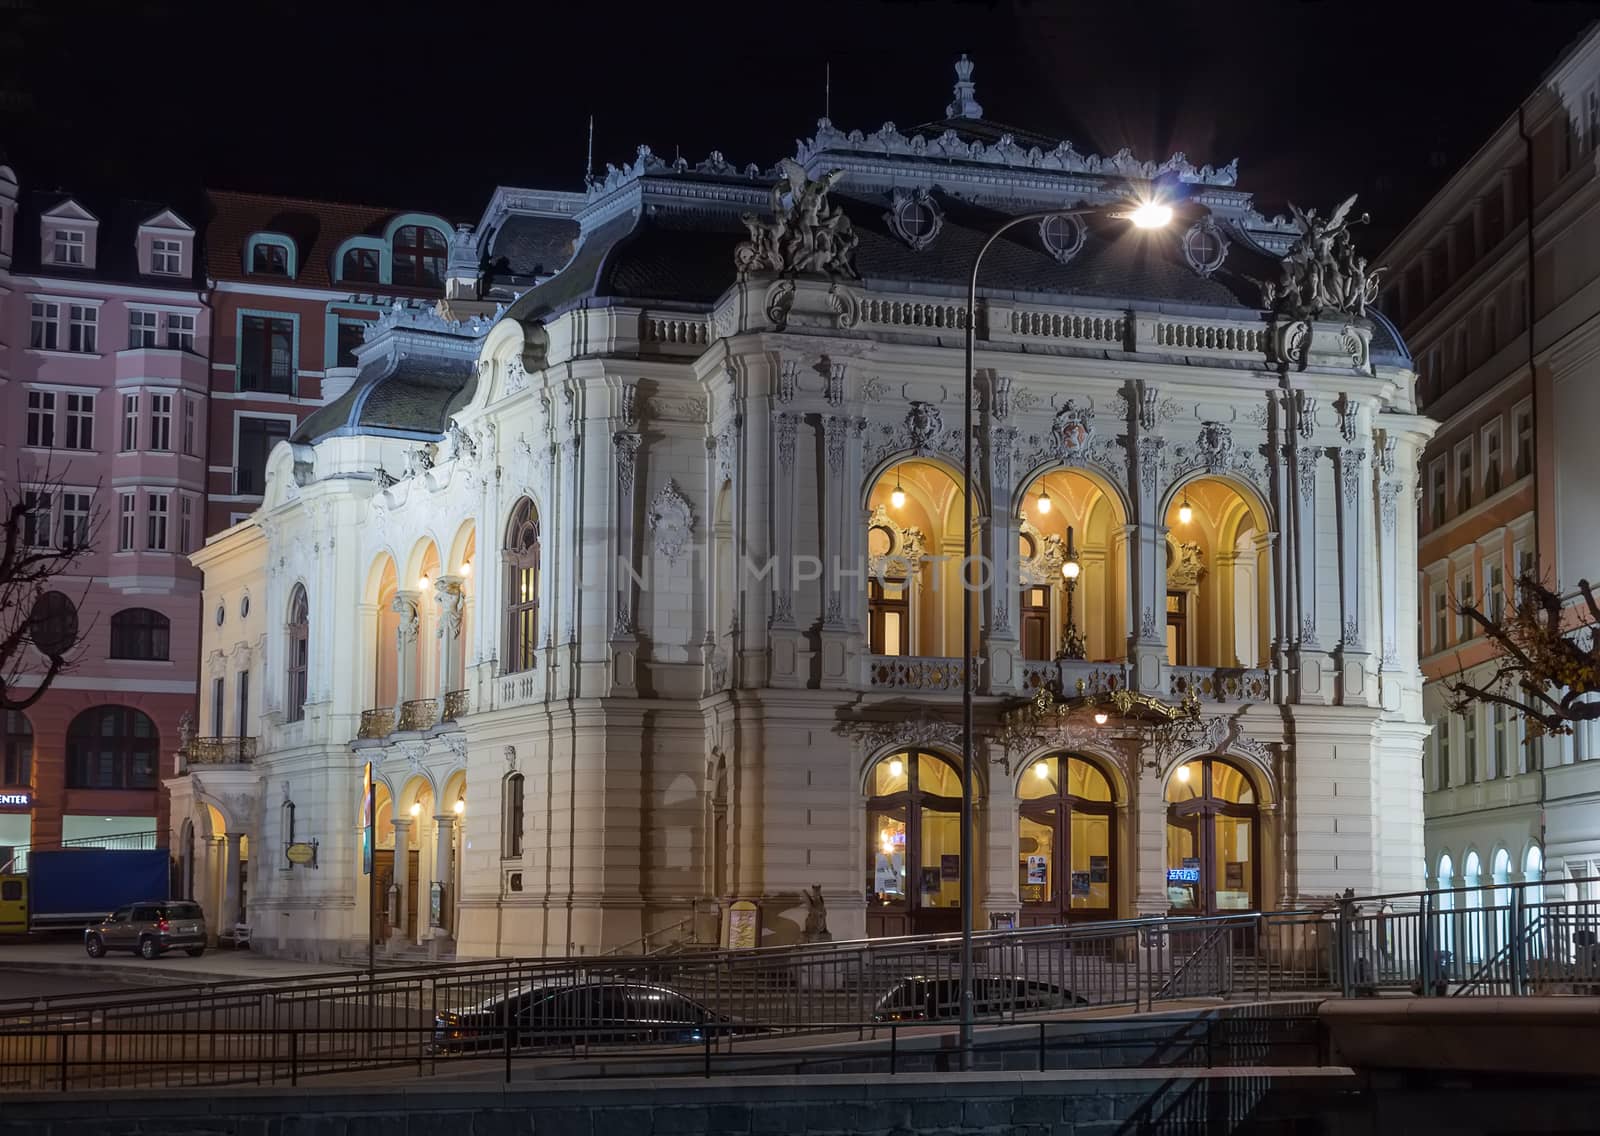 The Karlovy Vary theatre was built in the years 1884-1886. The authors of this magnificent Neo-Baroque building were the Viennese architects Fellner and Helmer.